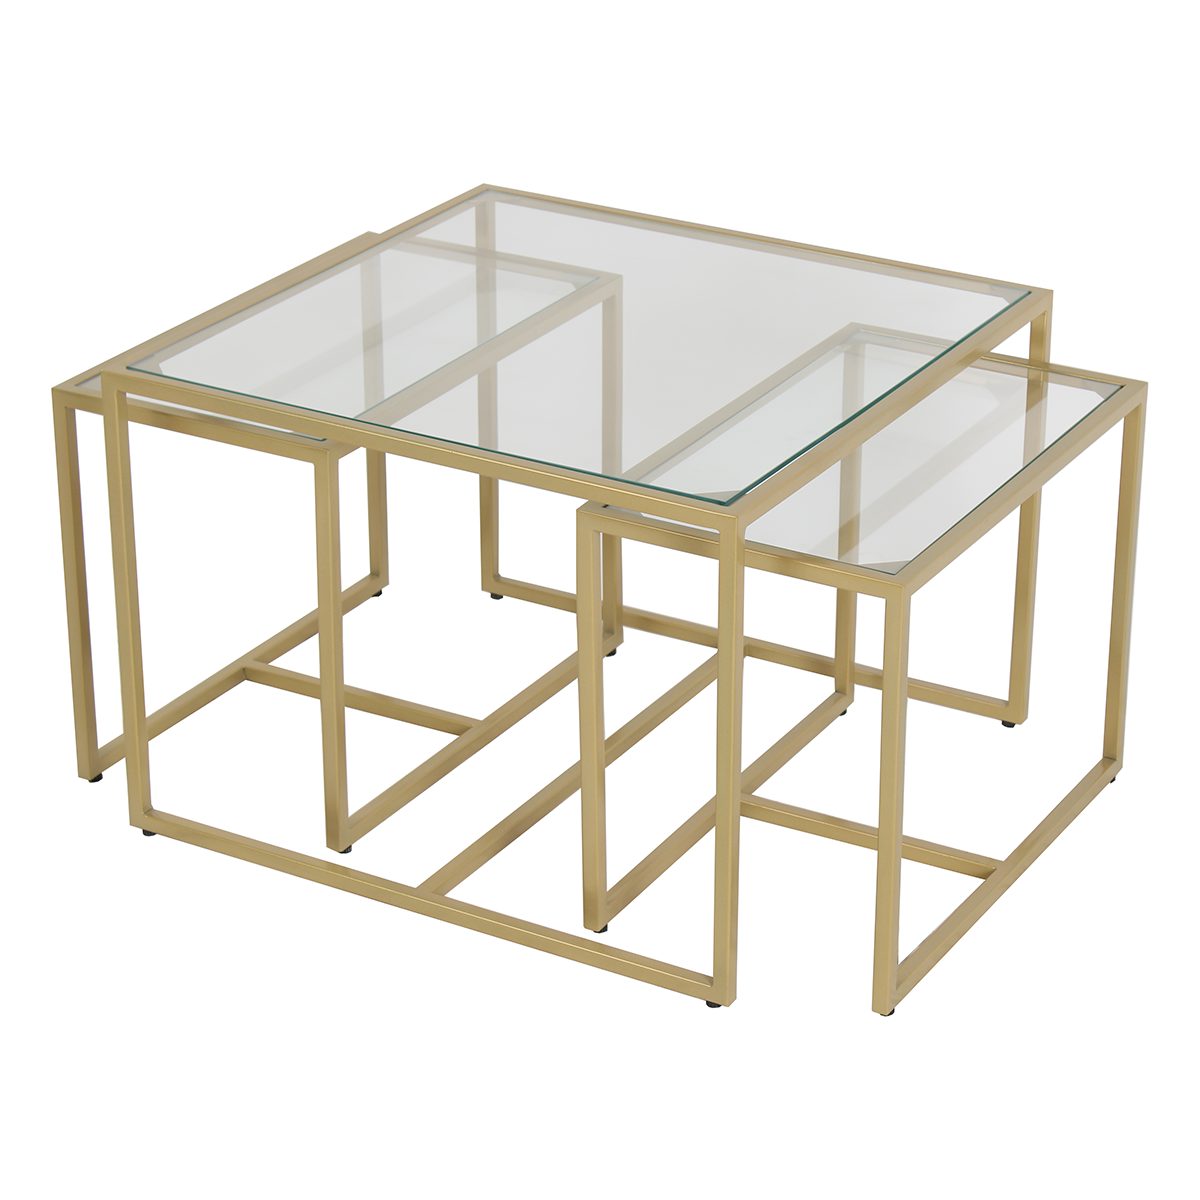 Stendal Nesting Glass Coffee Table Set of 3